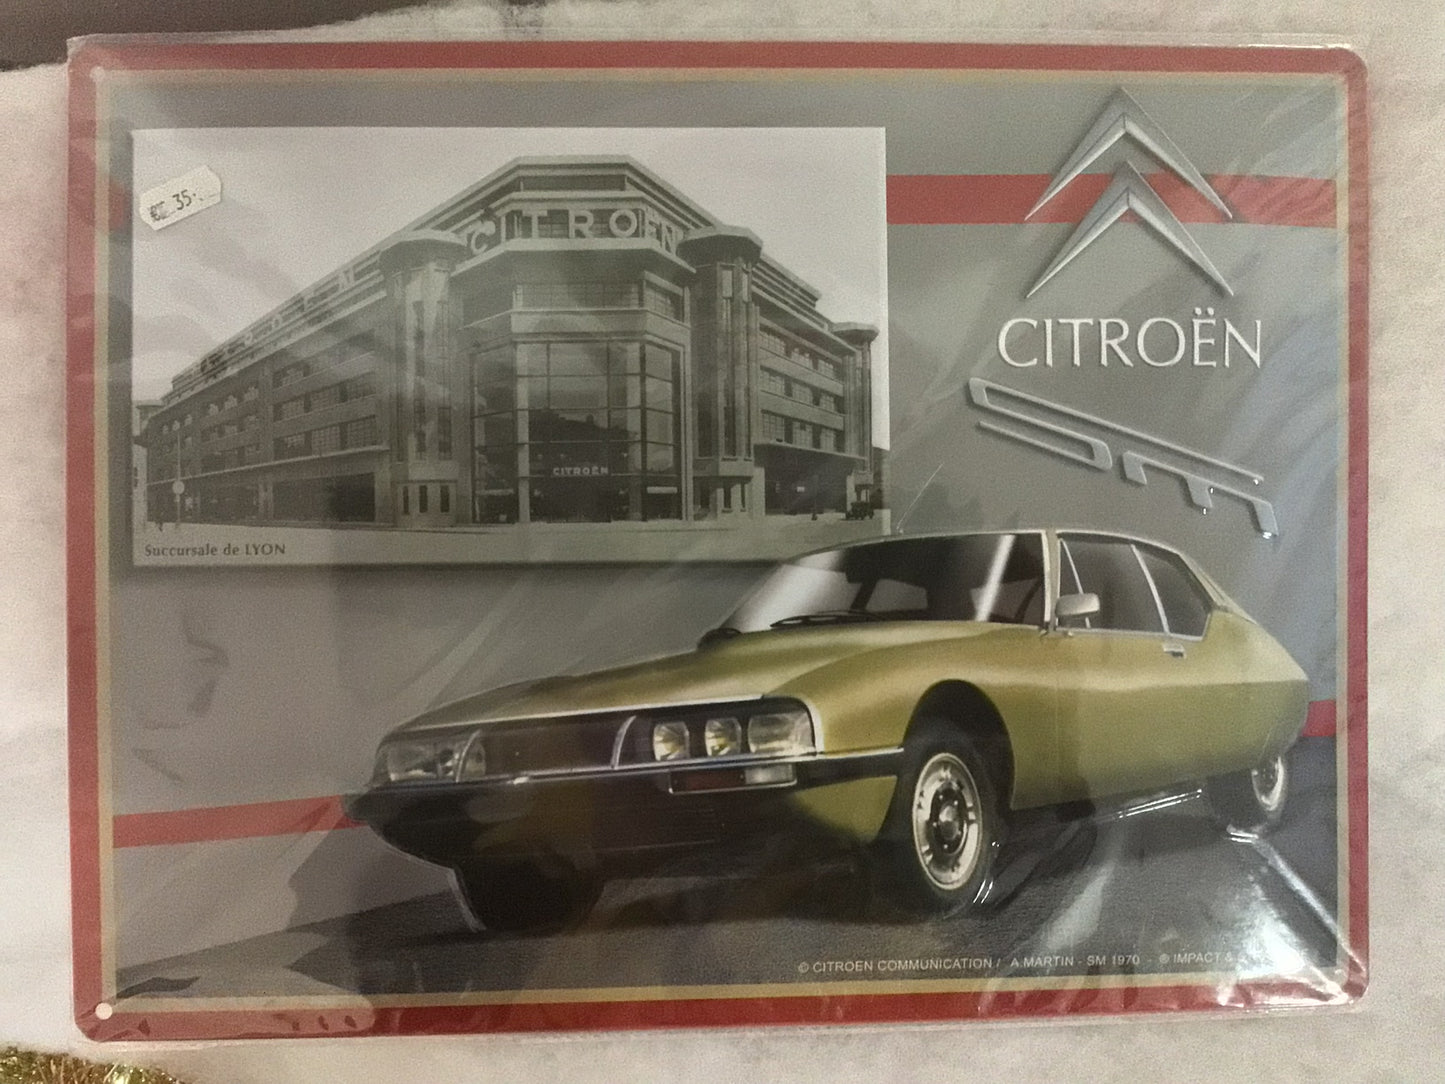 Citroën metal plates with reliefs